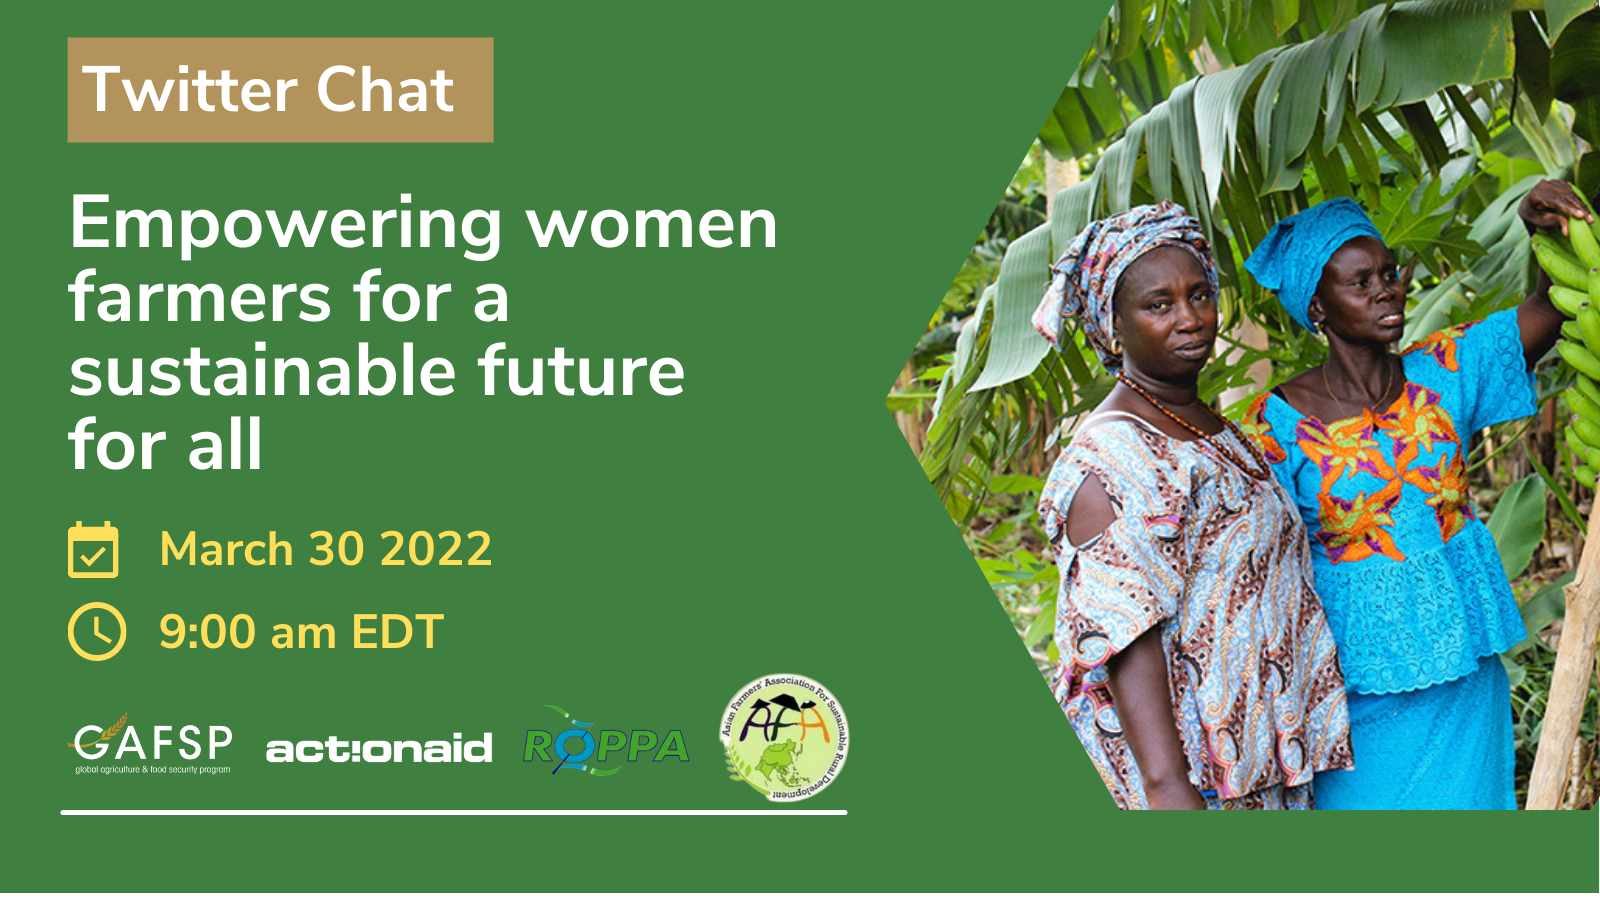 Twitter Chat: Empowering Women Farmers for a Sustainable Future for All